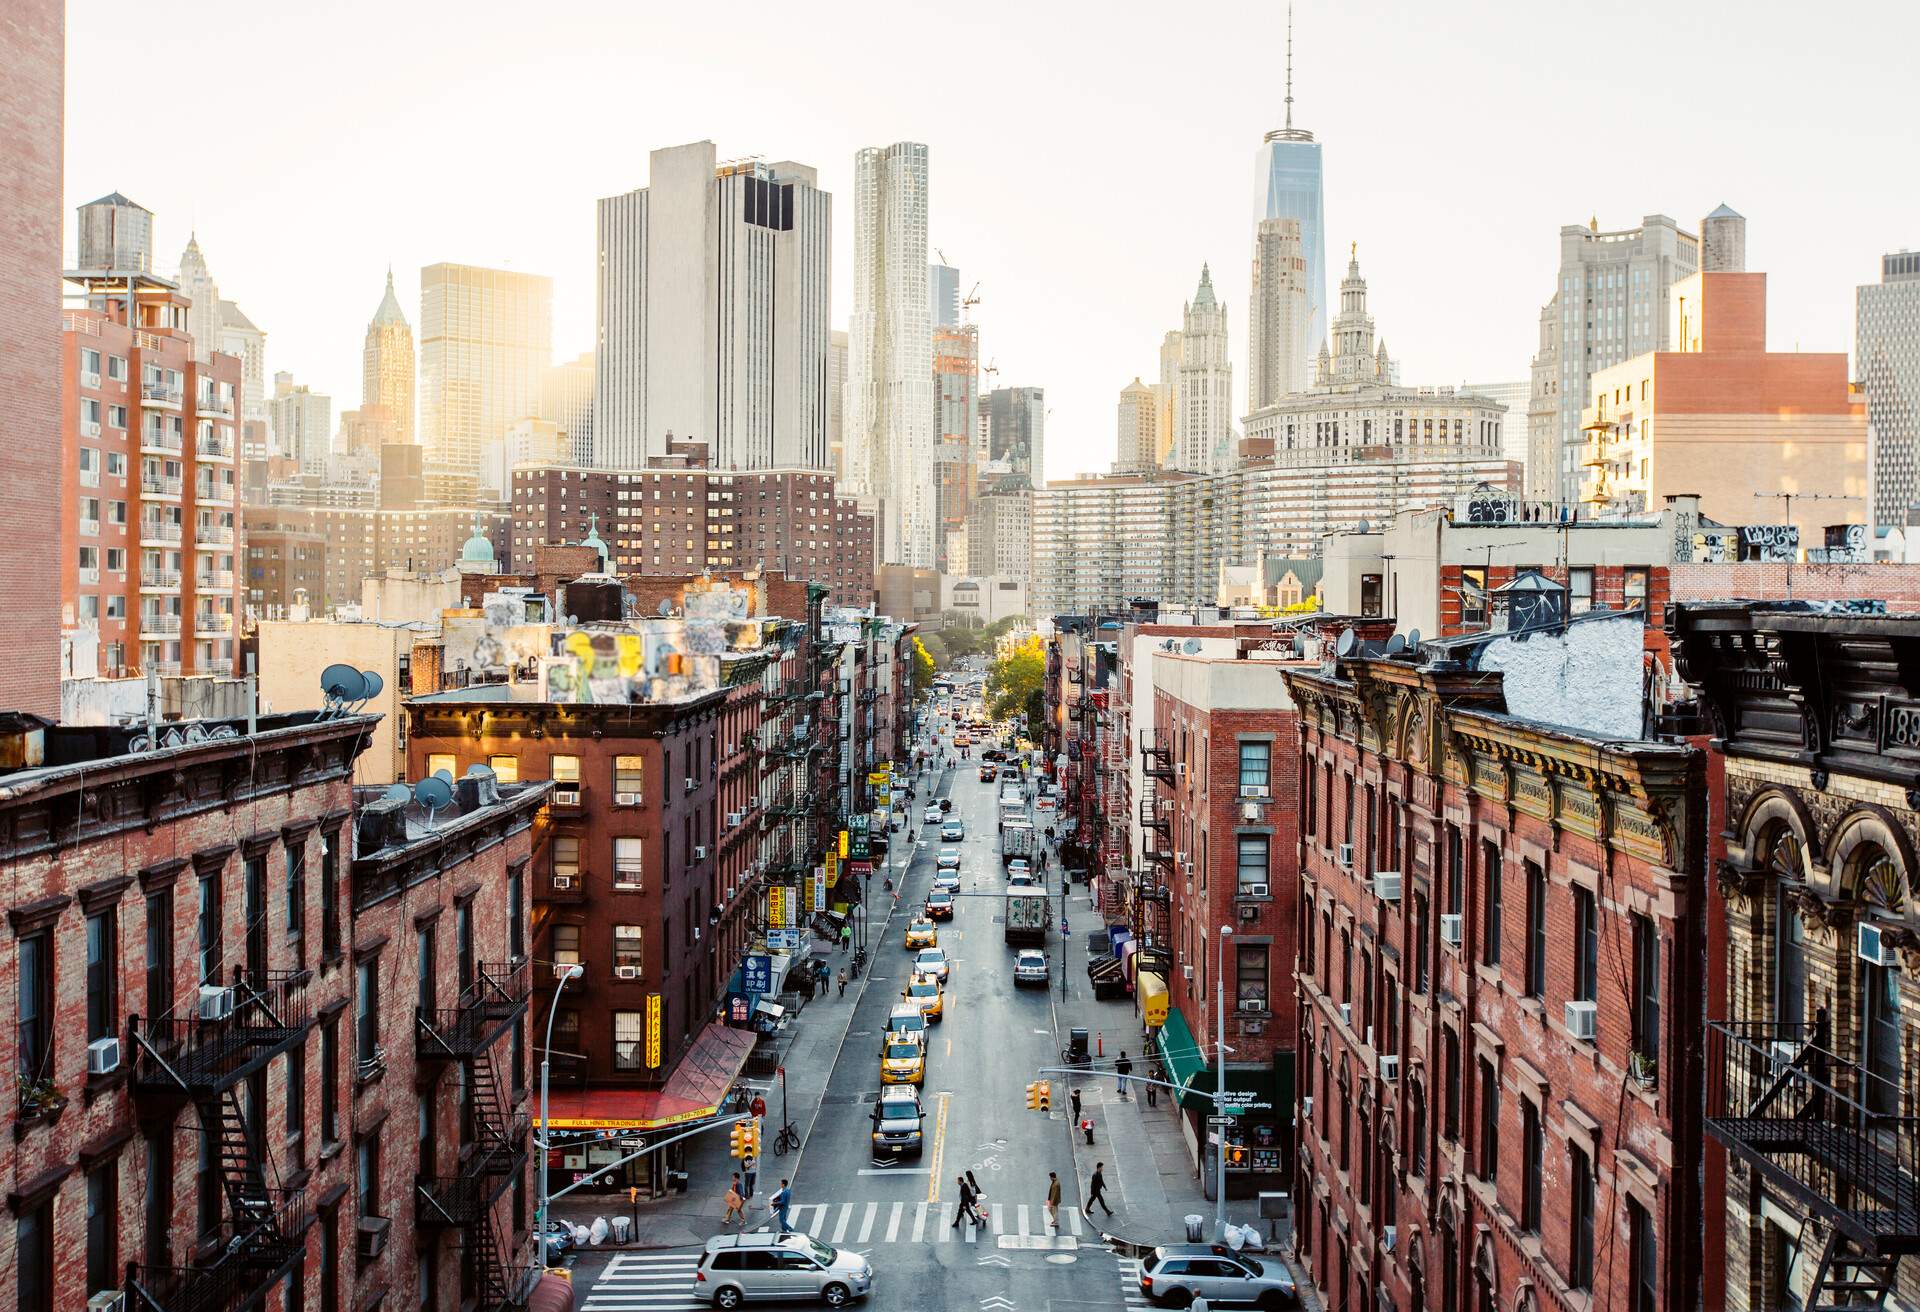 DEST_USA_NEW YORK_NEW-YORK-CITY_Lower East Side_GettyImages-640006562